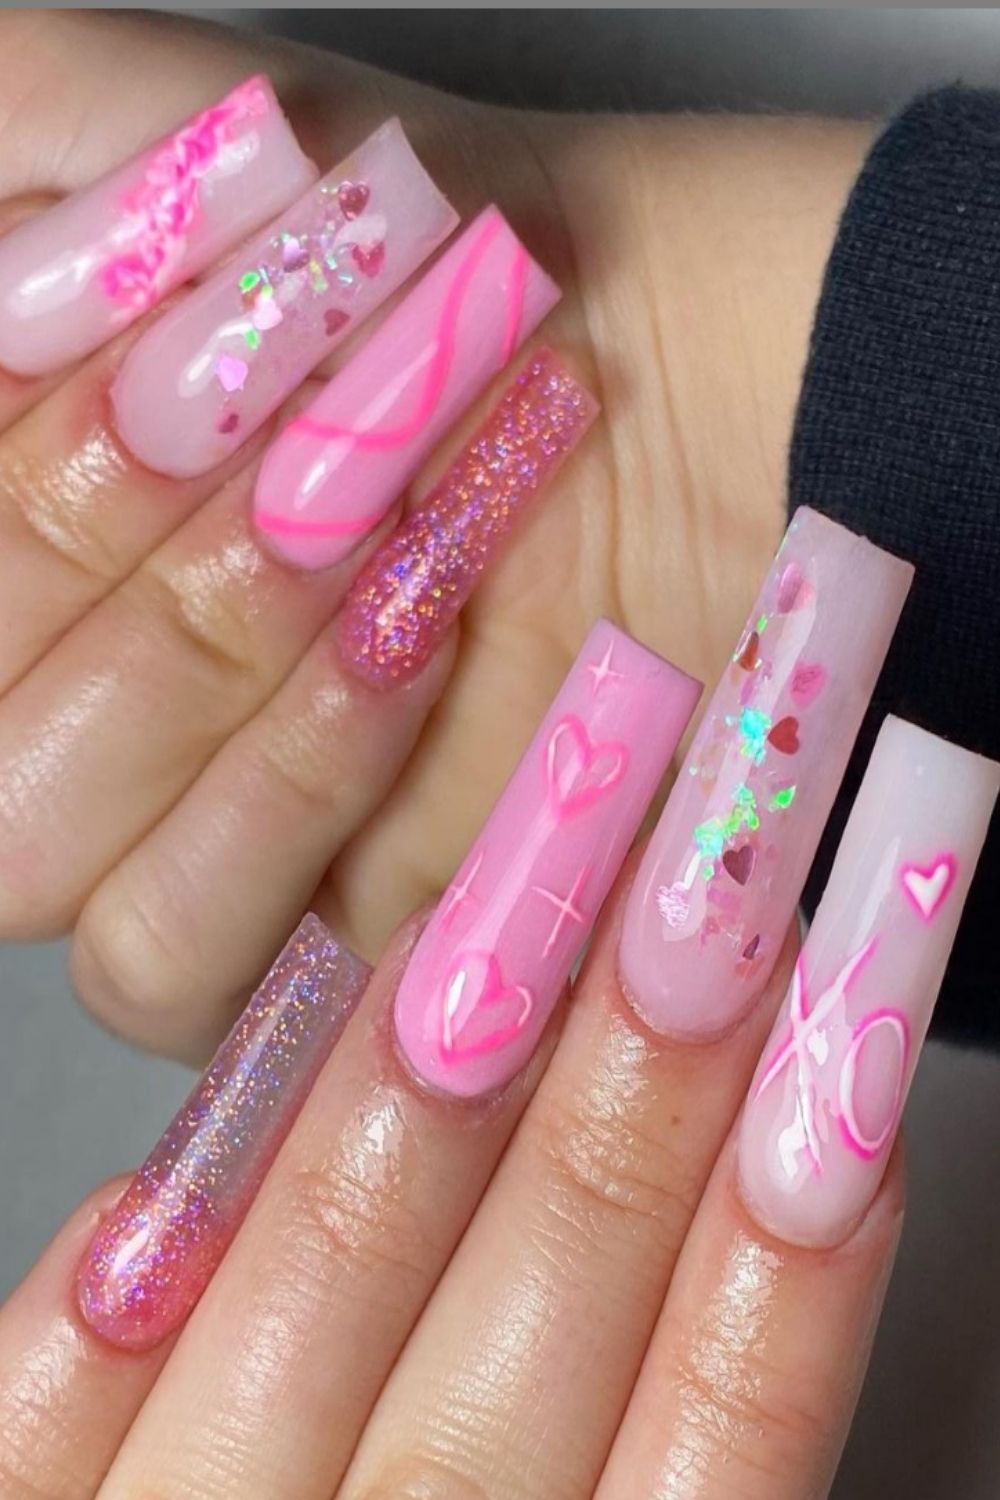 35+ Amazing Glitter Acrylic Nails You Want To Try In 2021! - Page 4 of 5